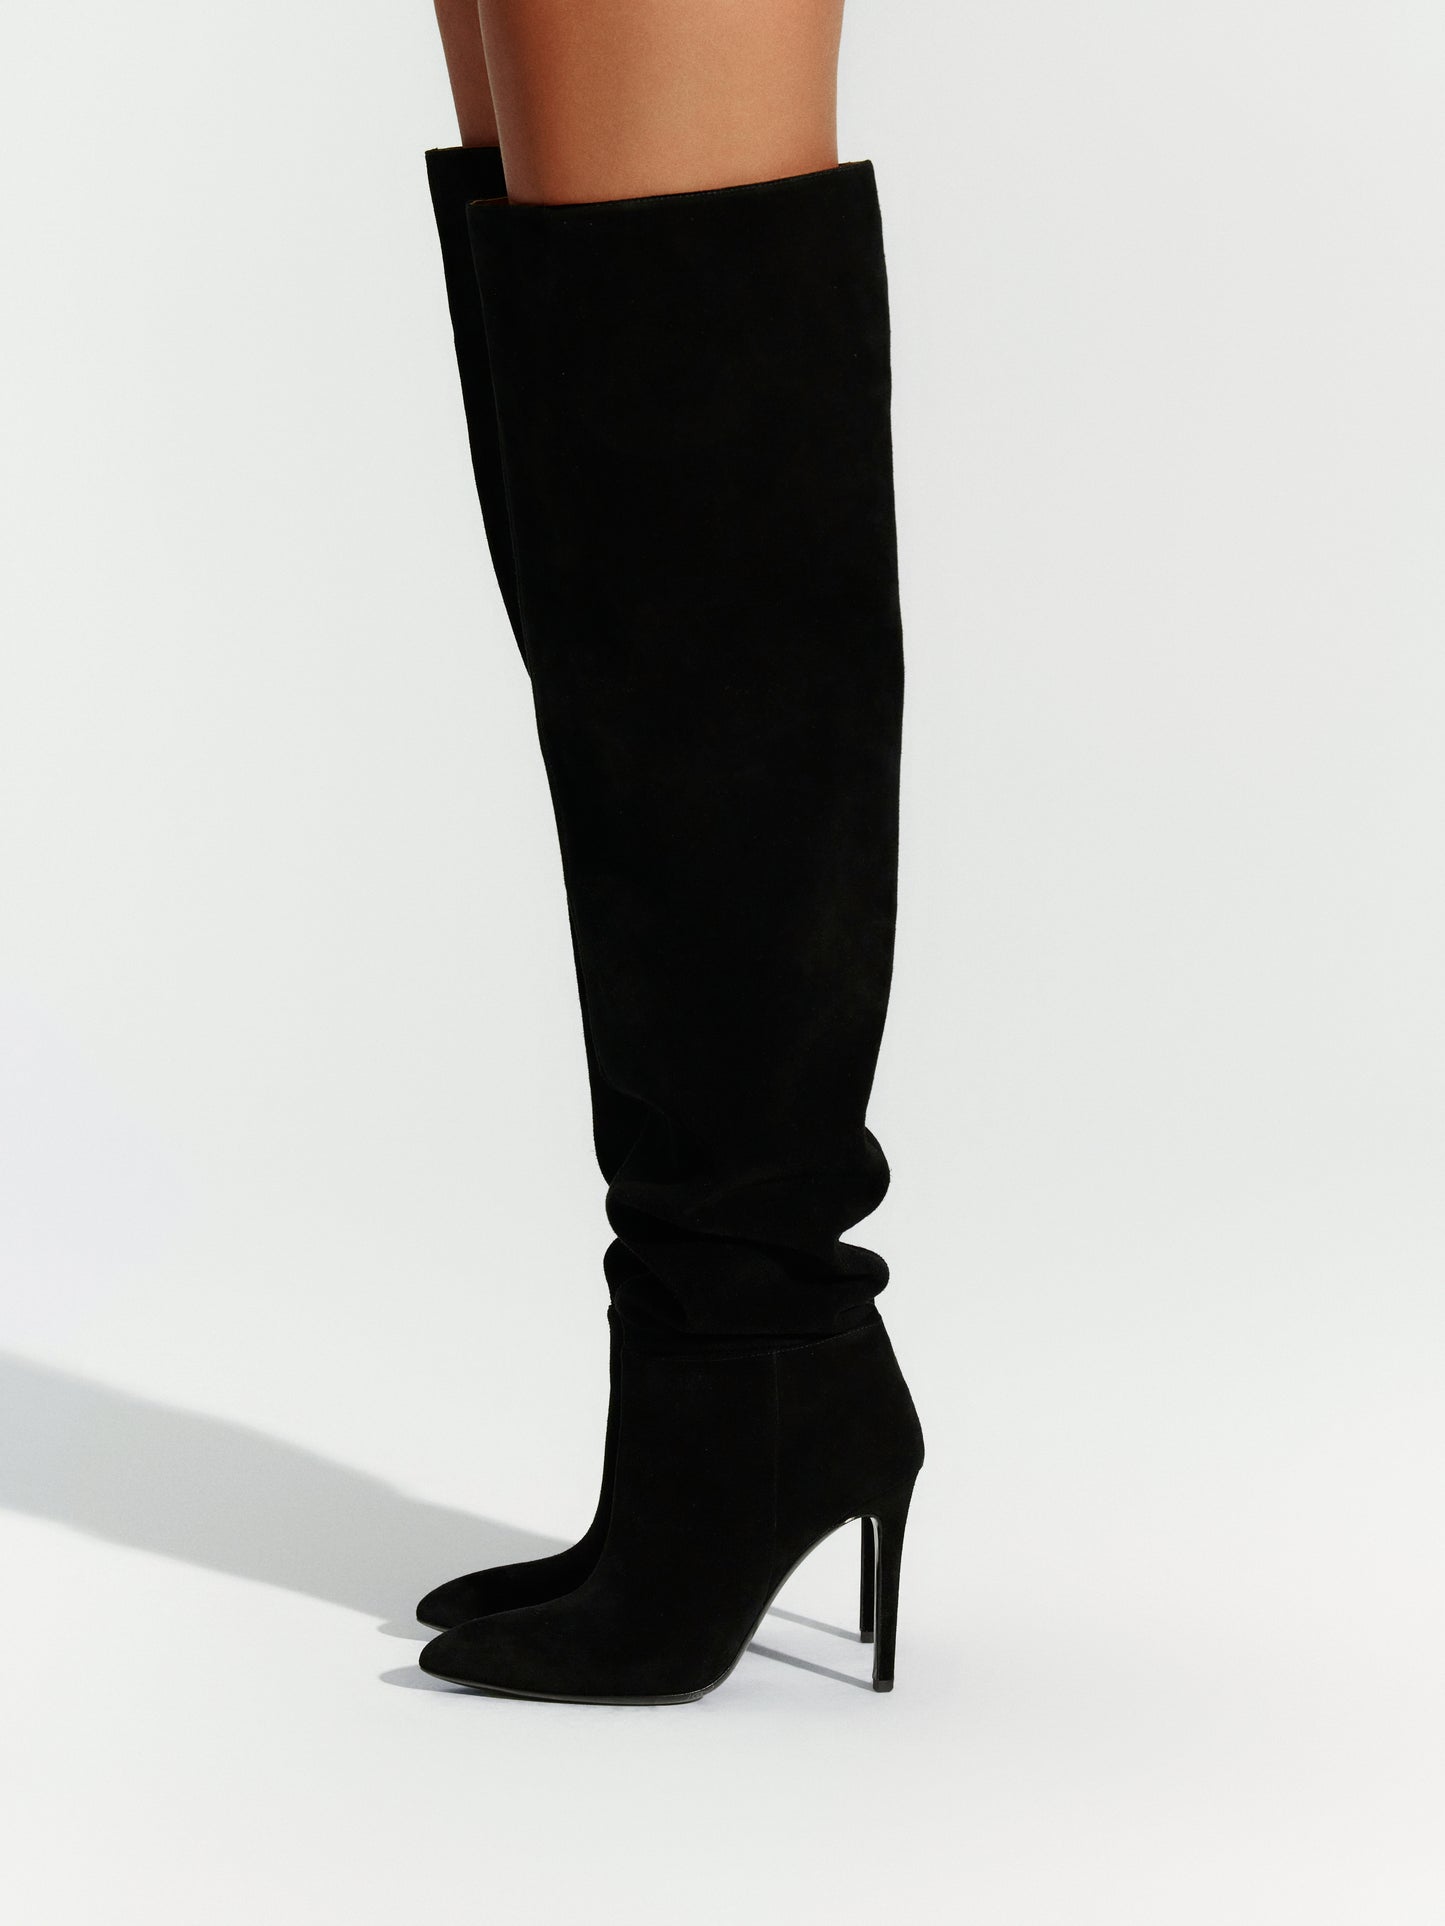 The Thigh High Boot